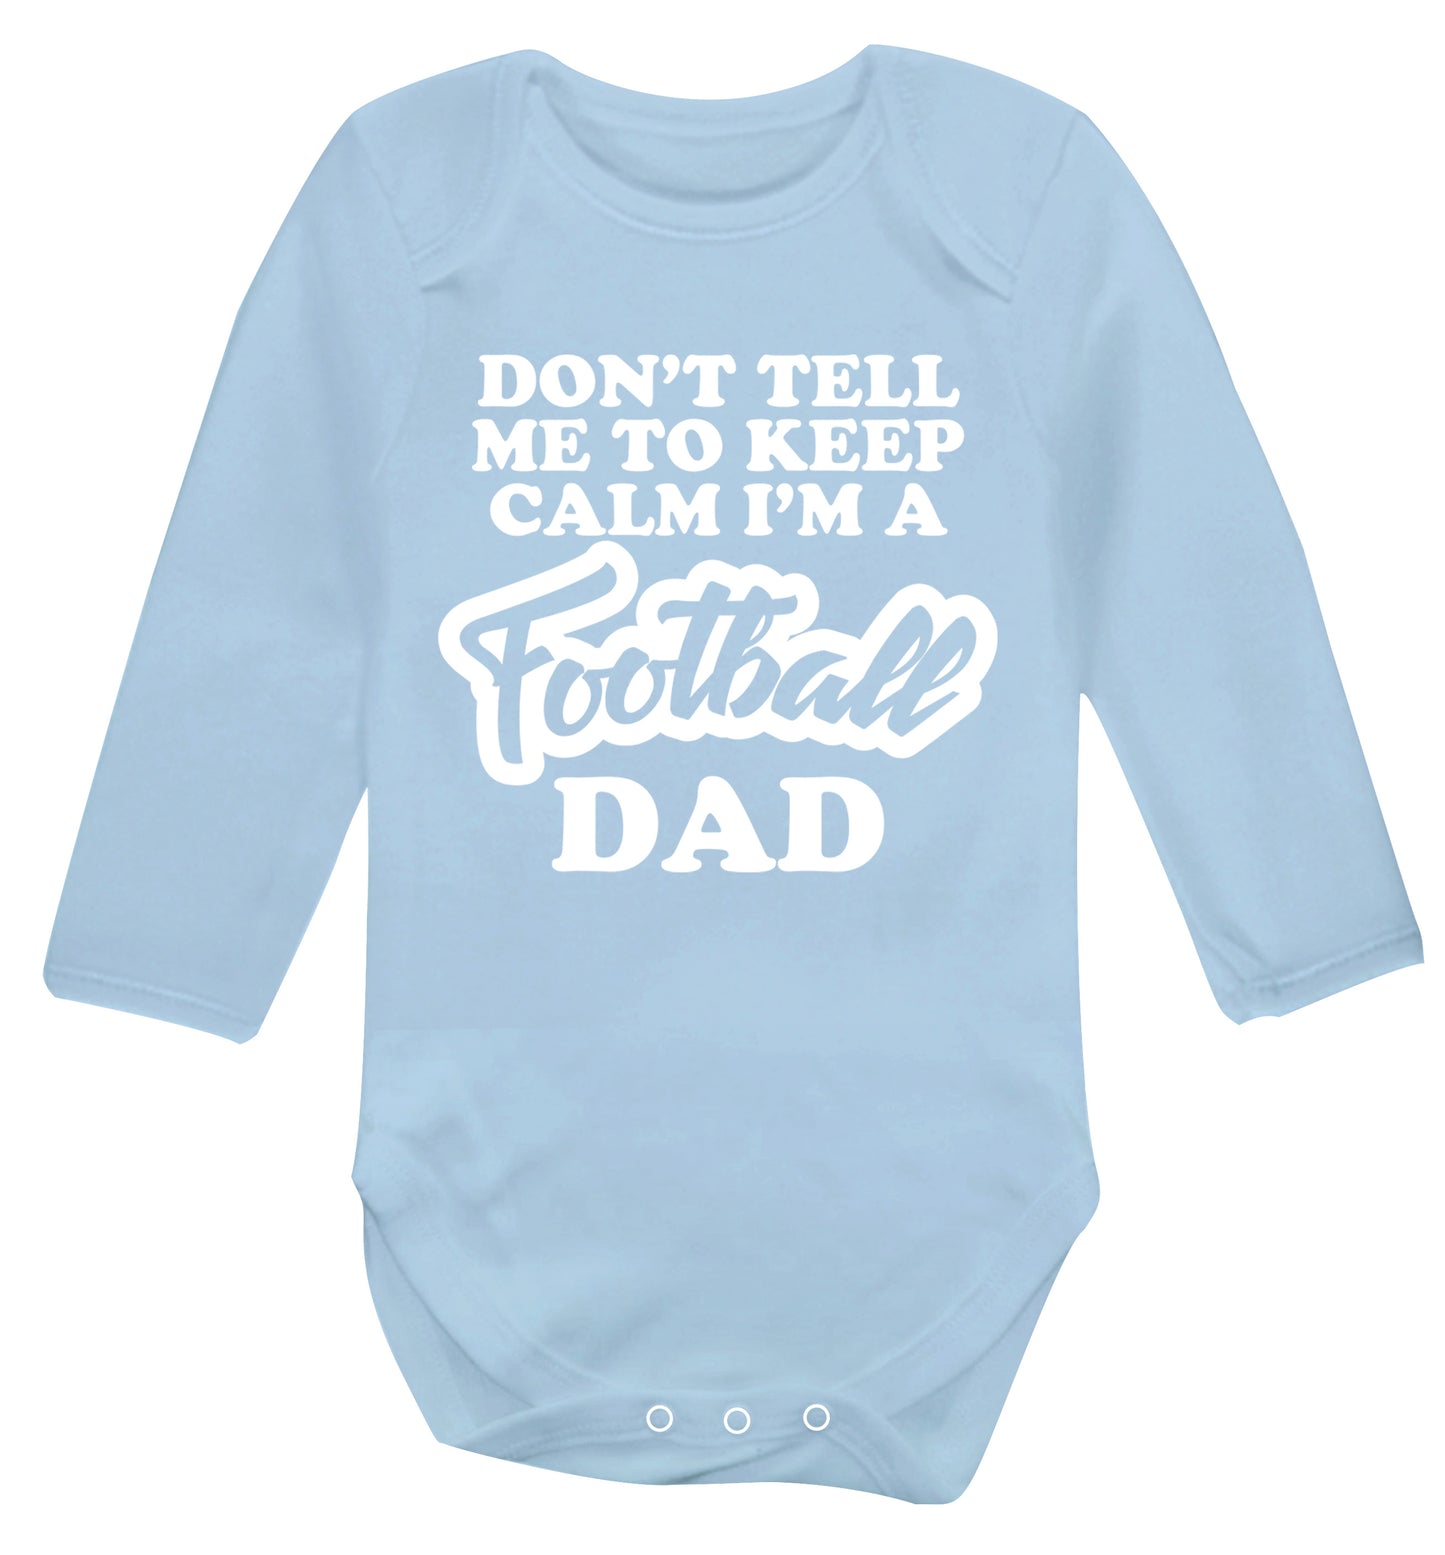 Don't tell me to keep calm I'm a football grandad Baby Vest long sleeved pale blue 6-12 months